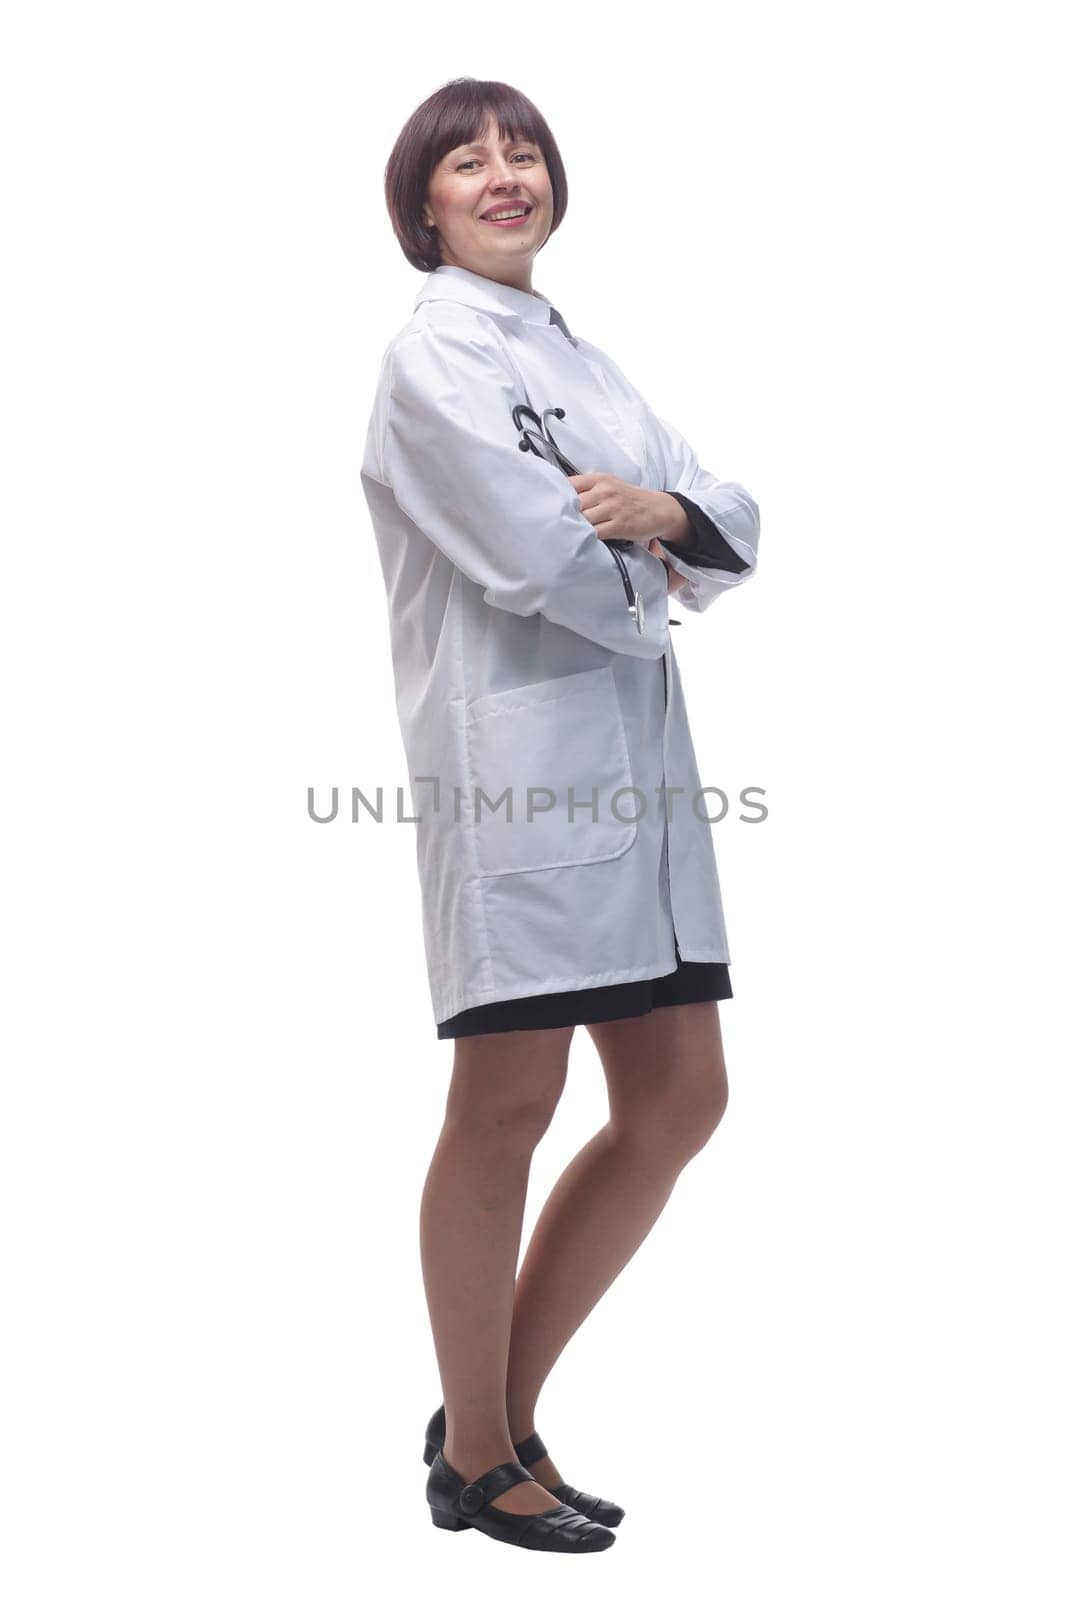 in full growth. friendly female doctor with a stethoscope in her hands. isolated on a white background.